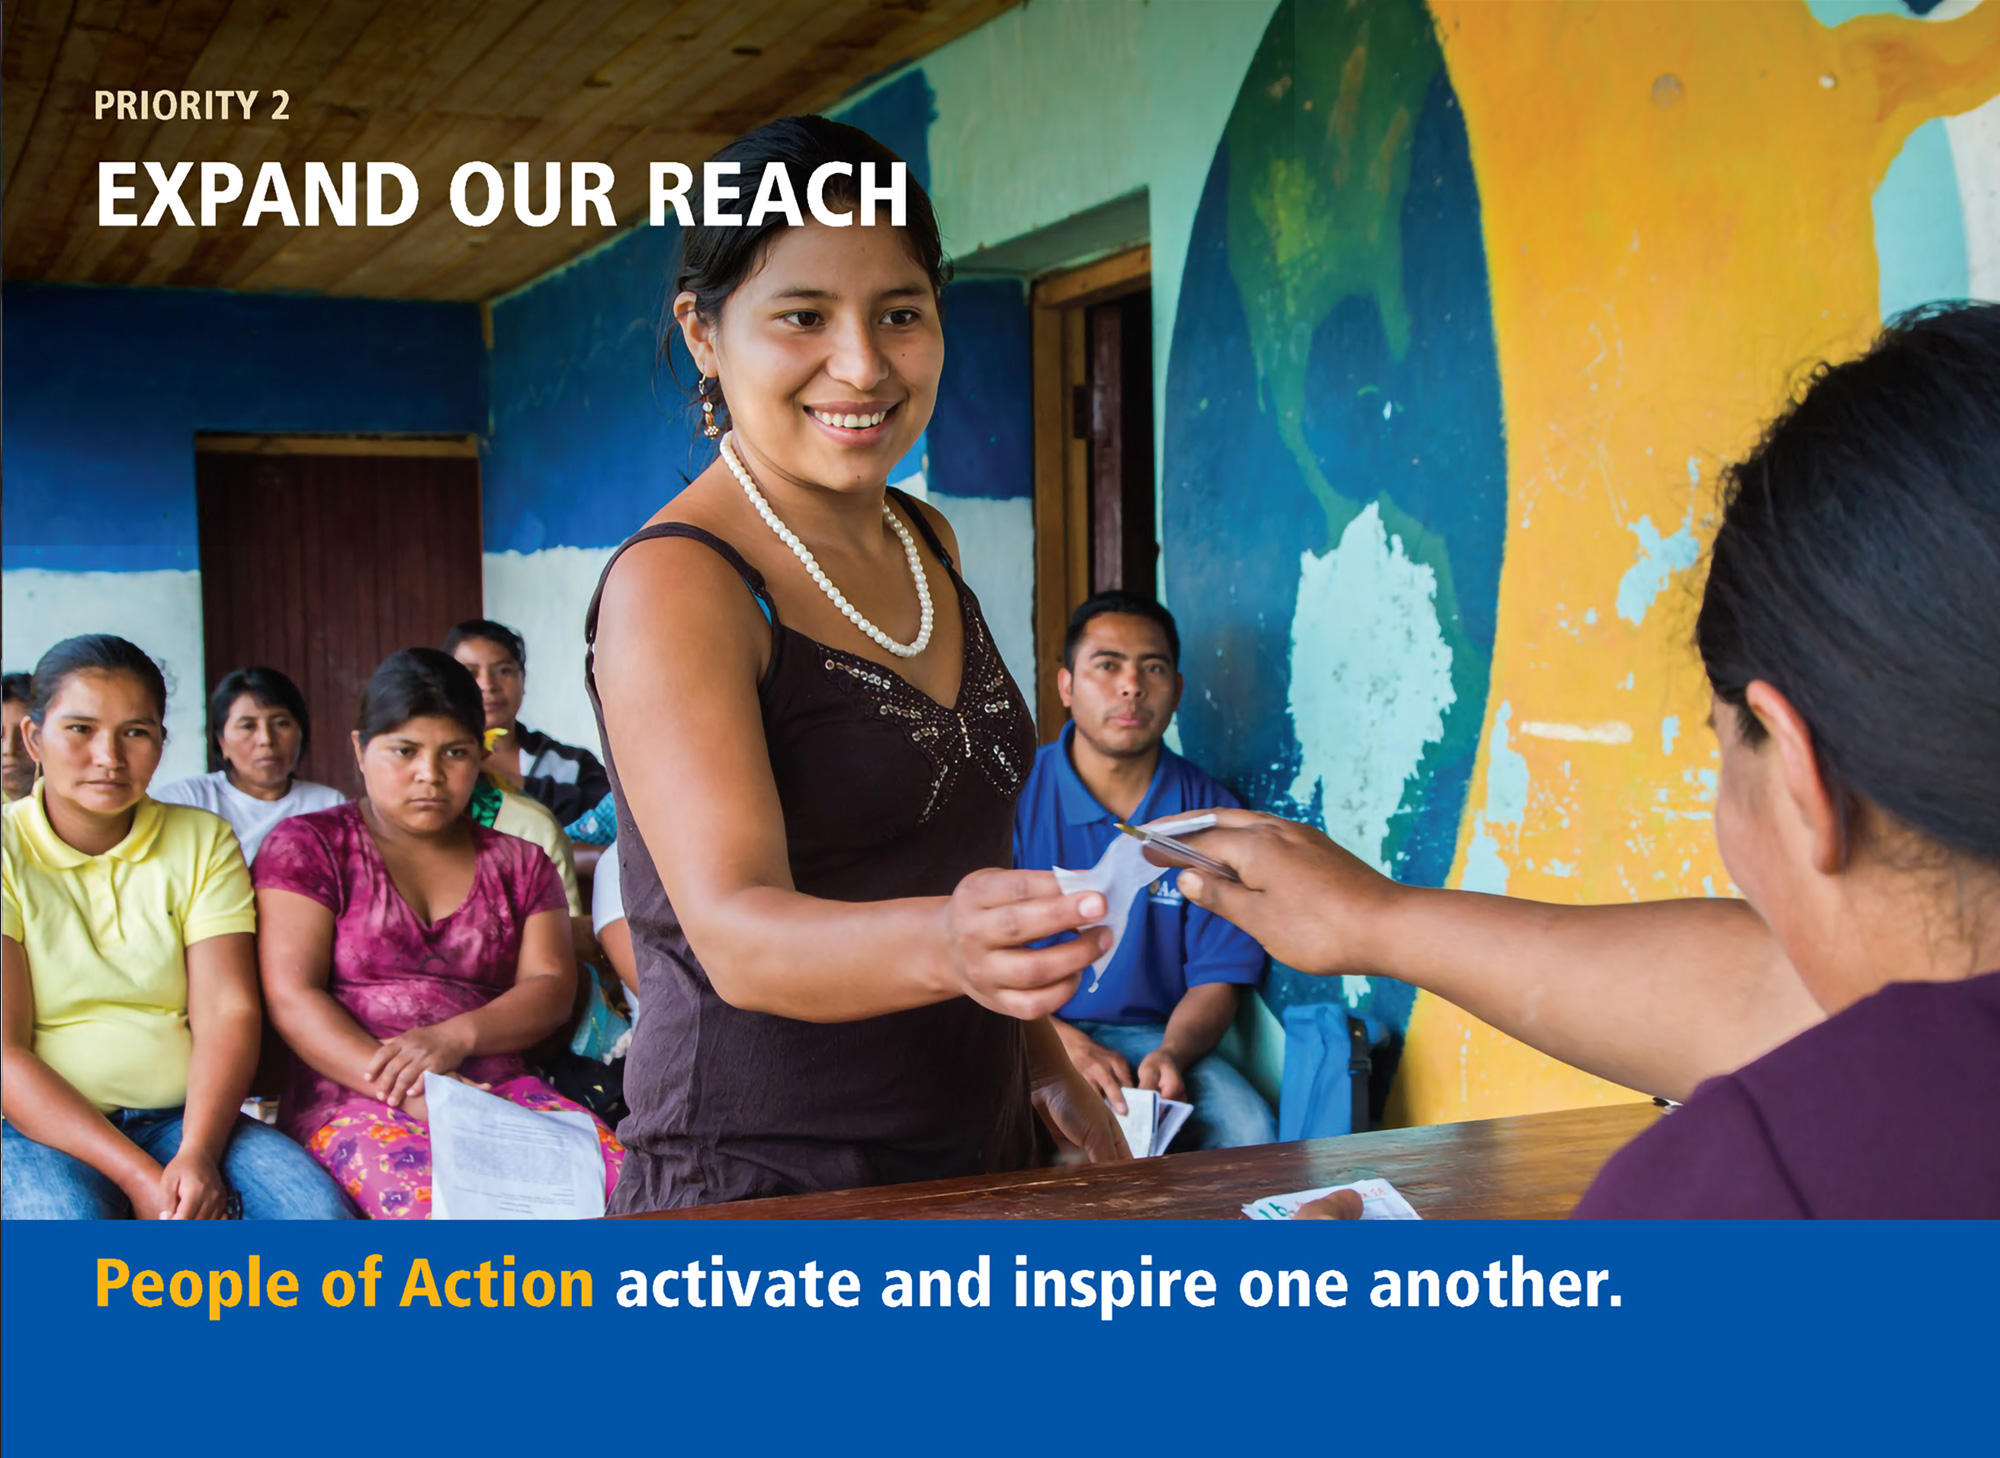 People of action activate and inspire each other.